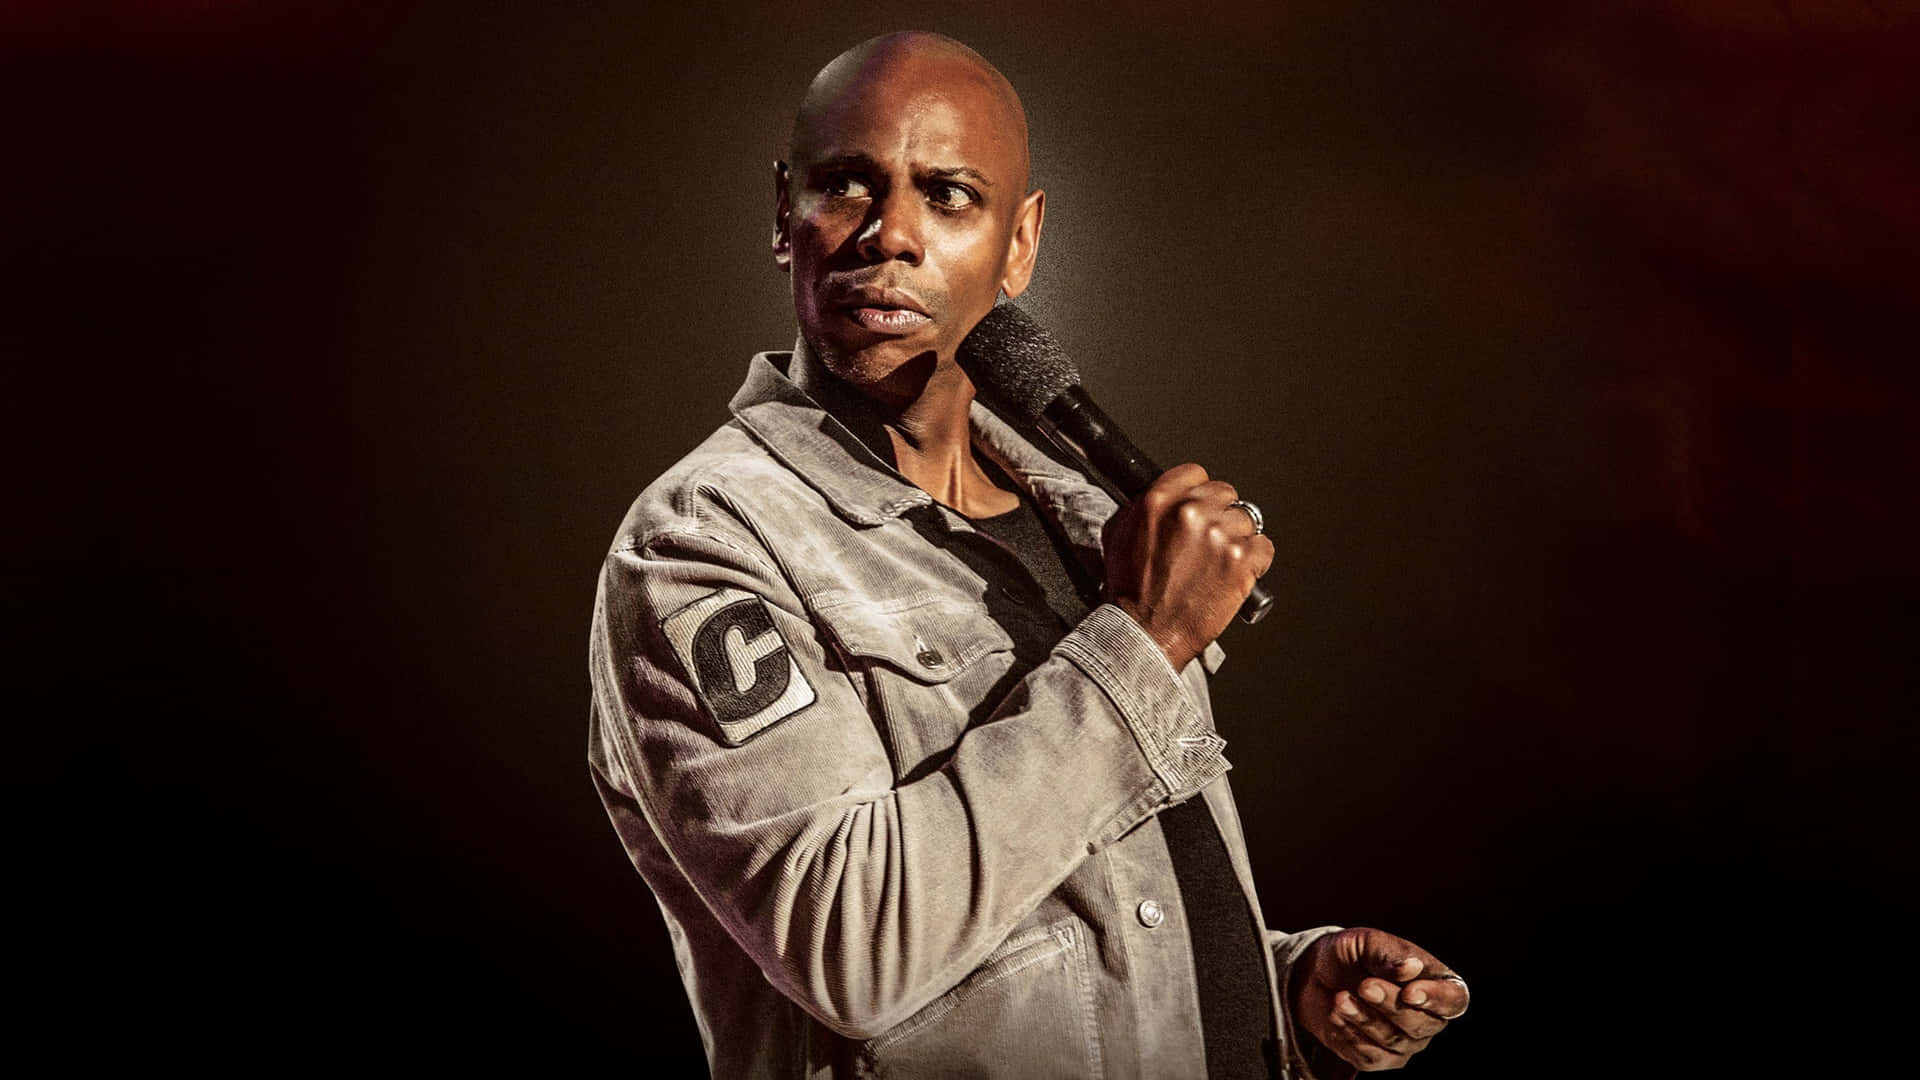 Comedian Dave Chappelle Performing On Stage Background